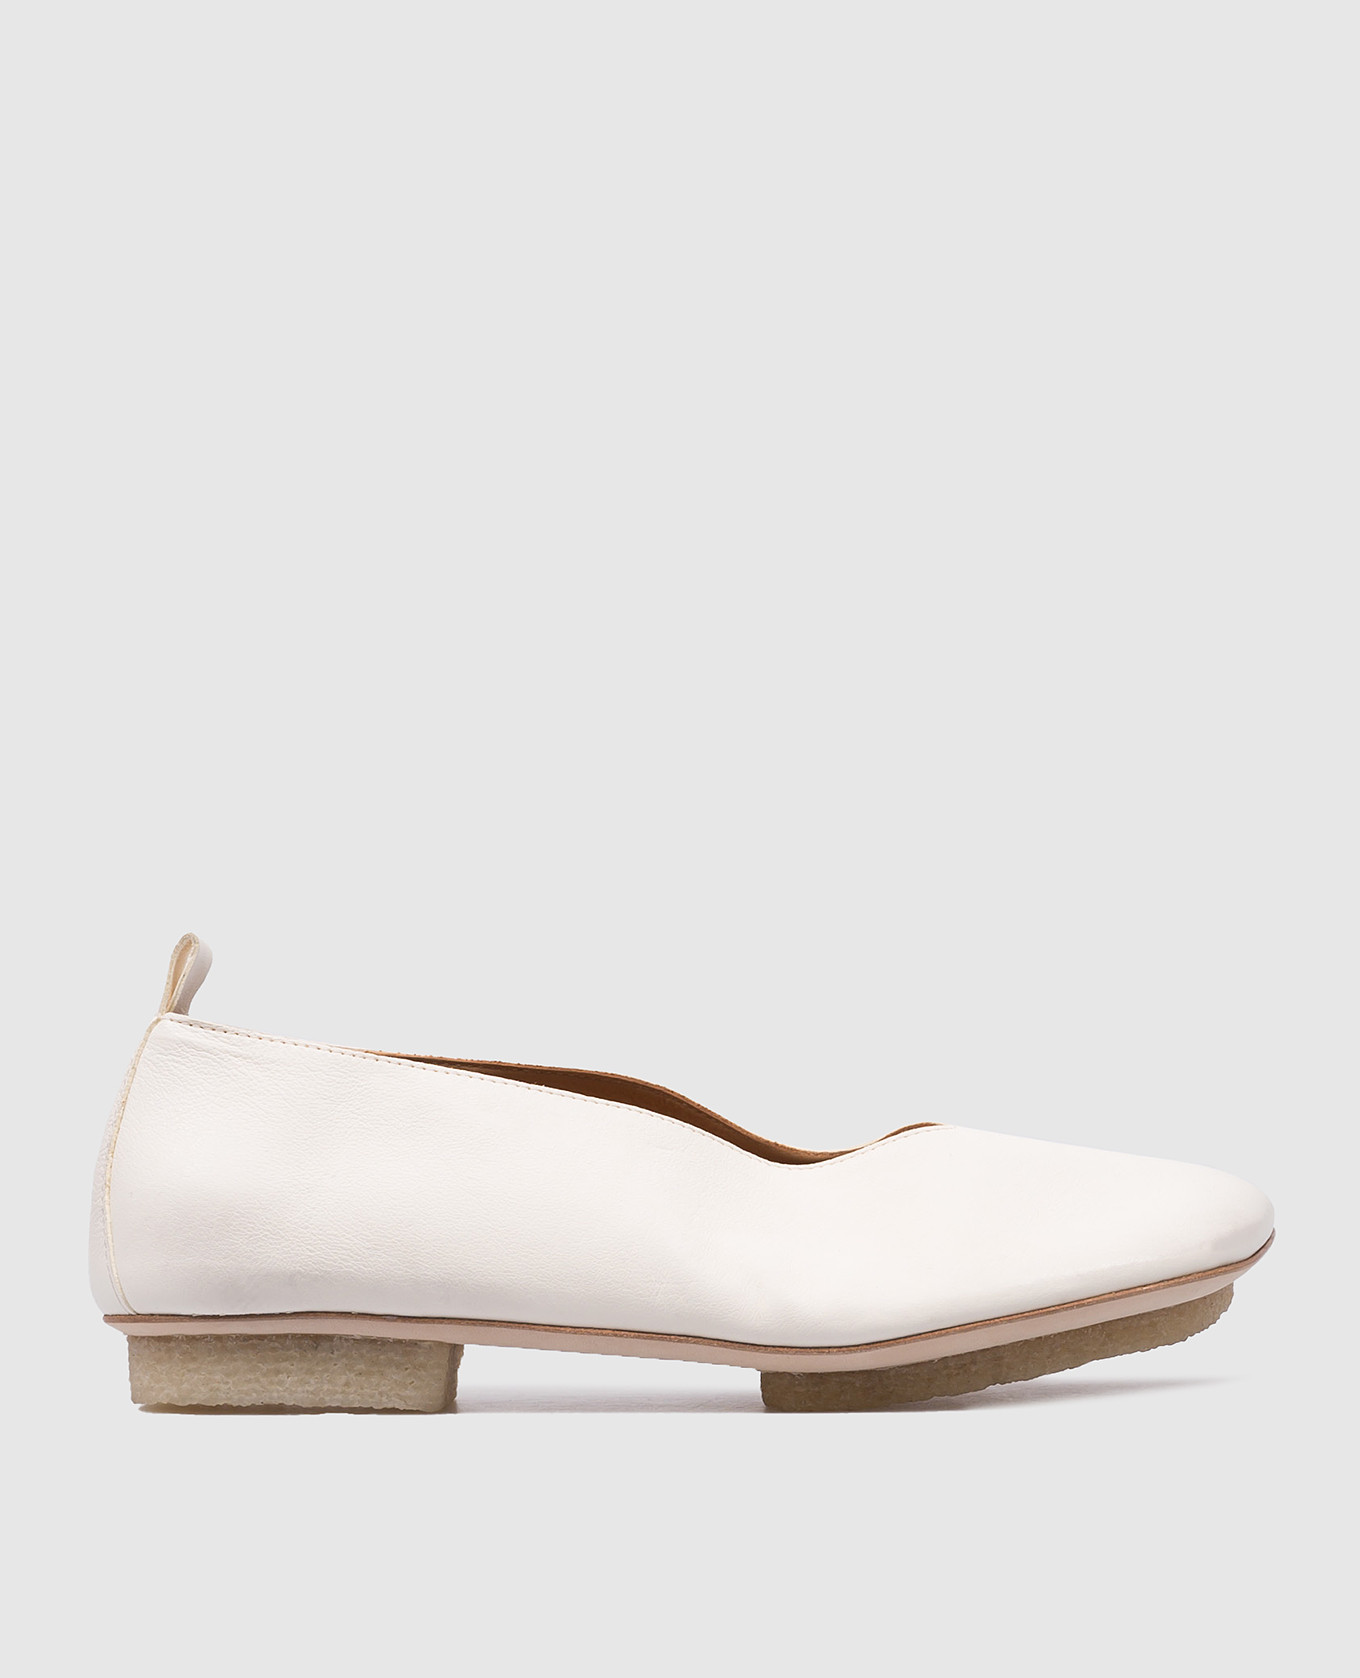 White leather ballet flats